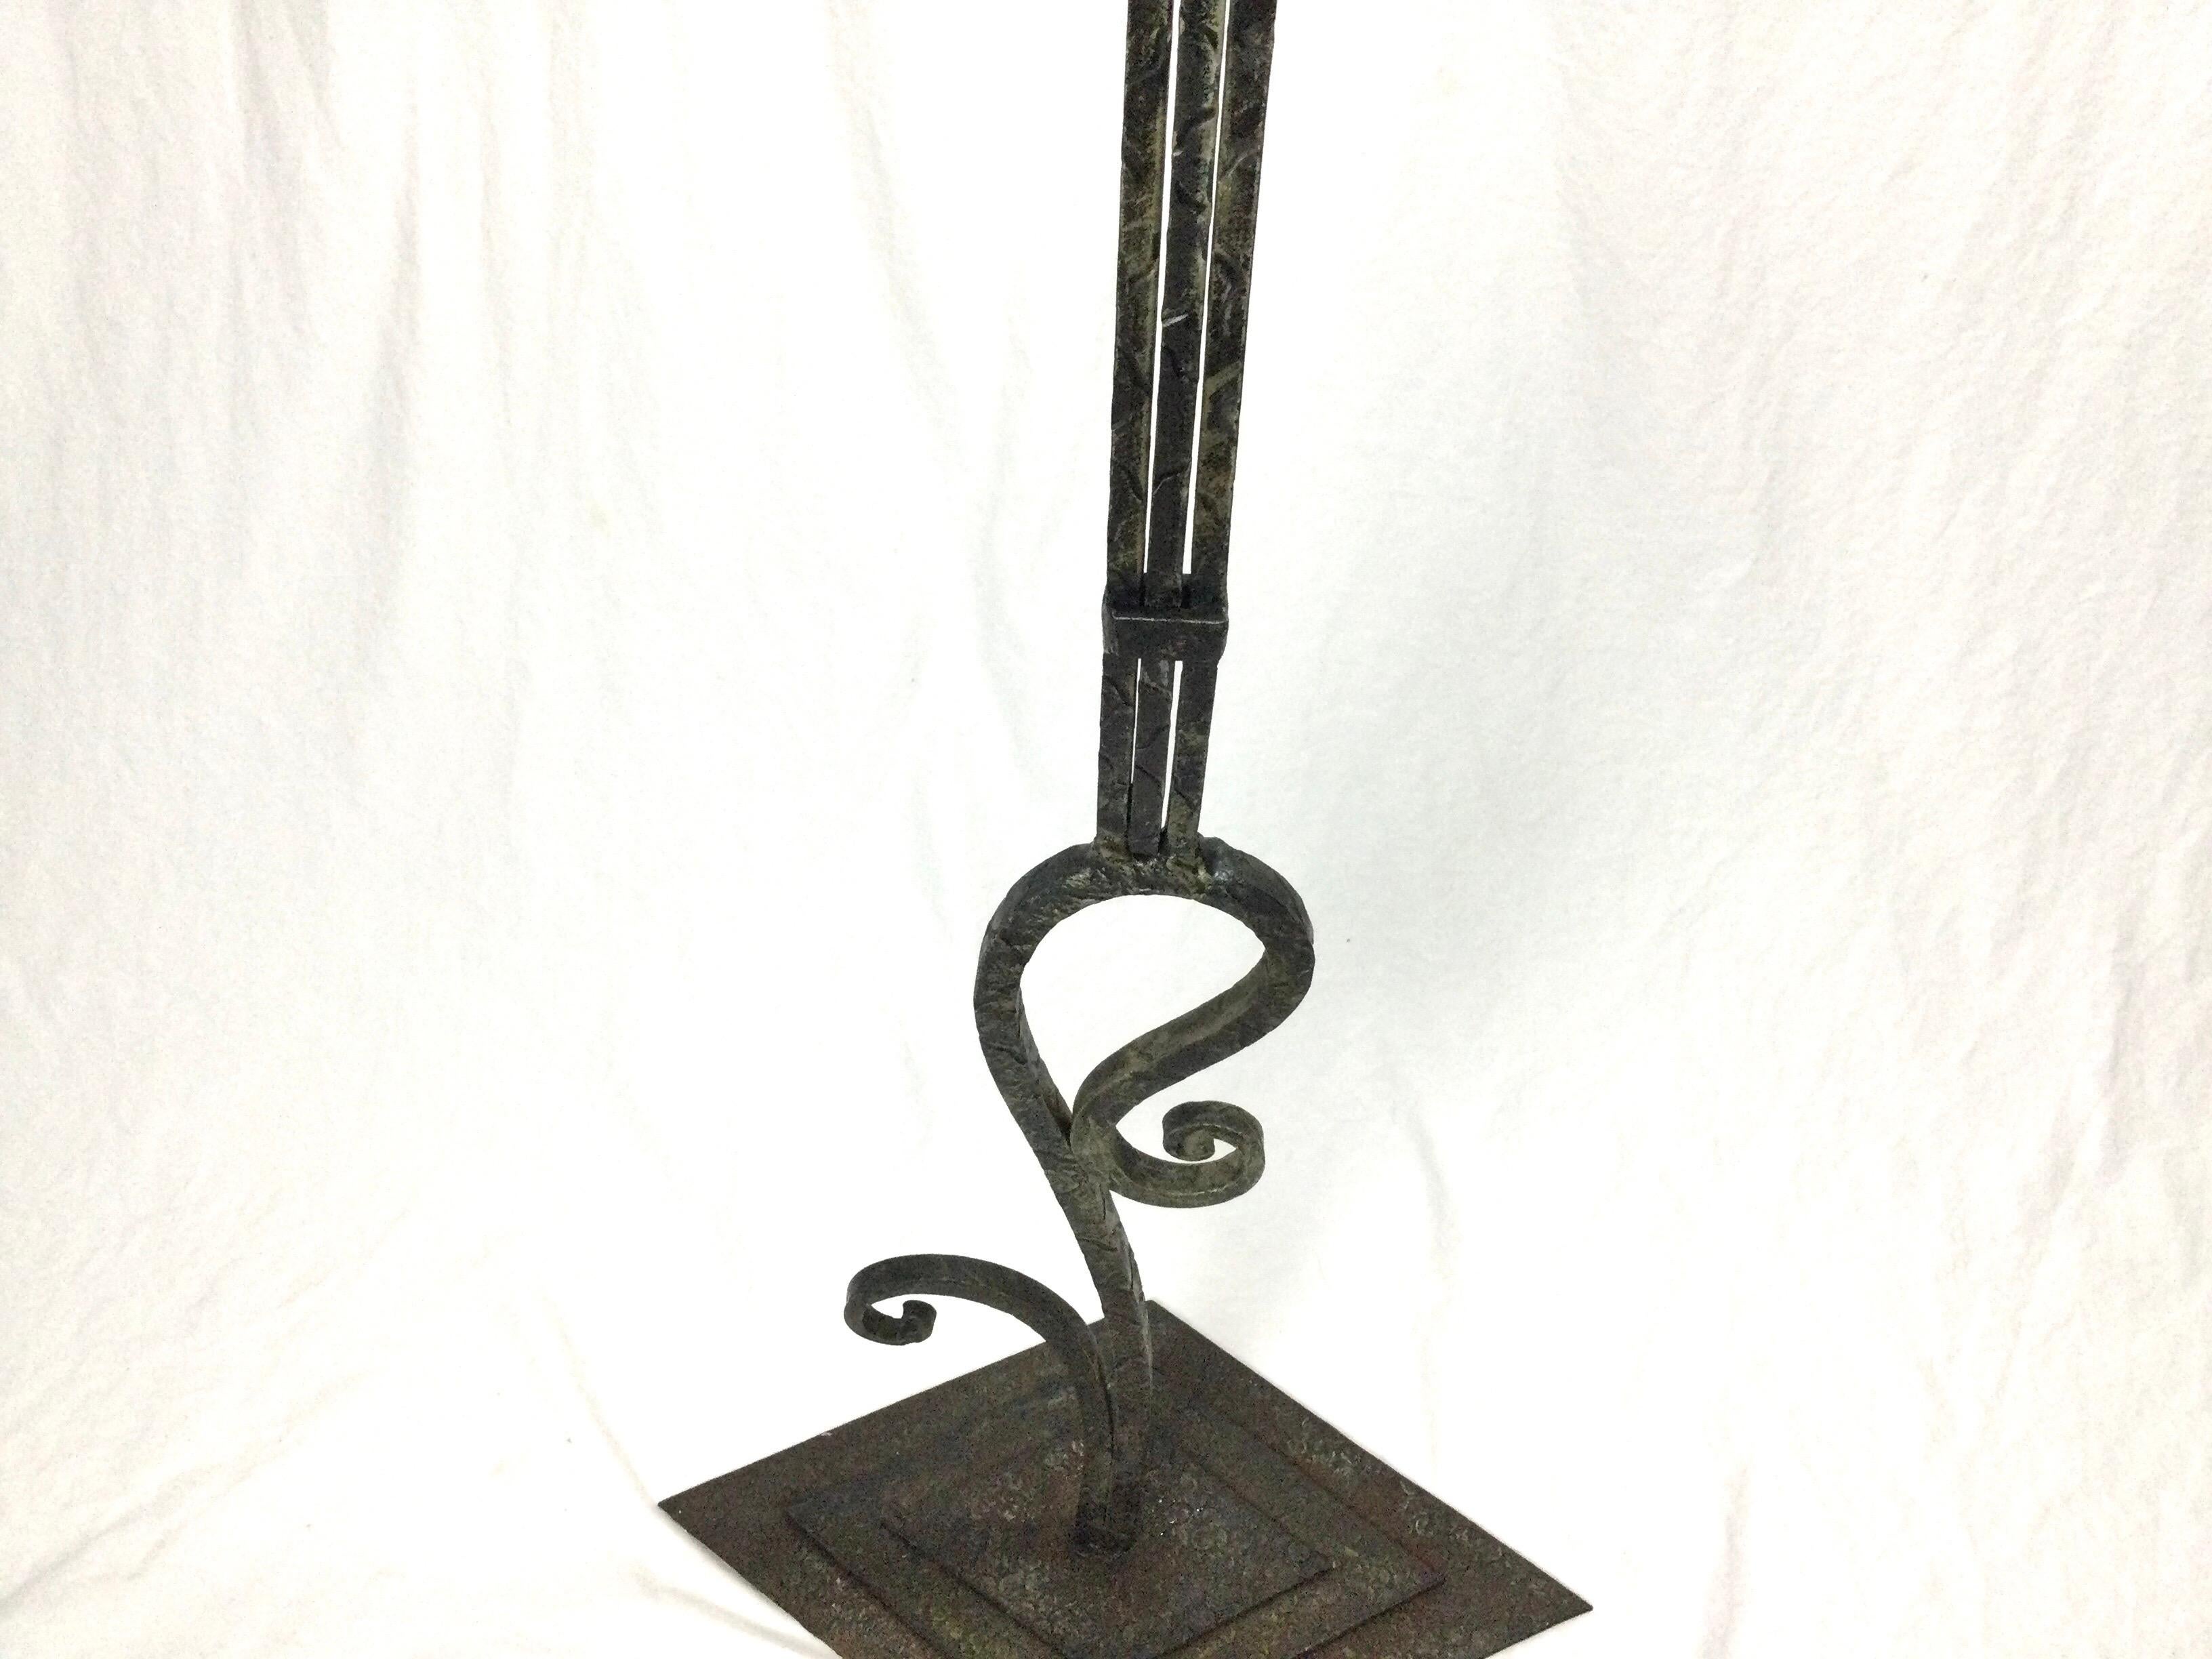 Art Deco Iron Adjustable Clothing Display Valet Stand In Excellent Condition For Sale In Lambertville, NJ